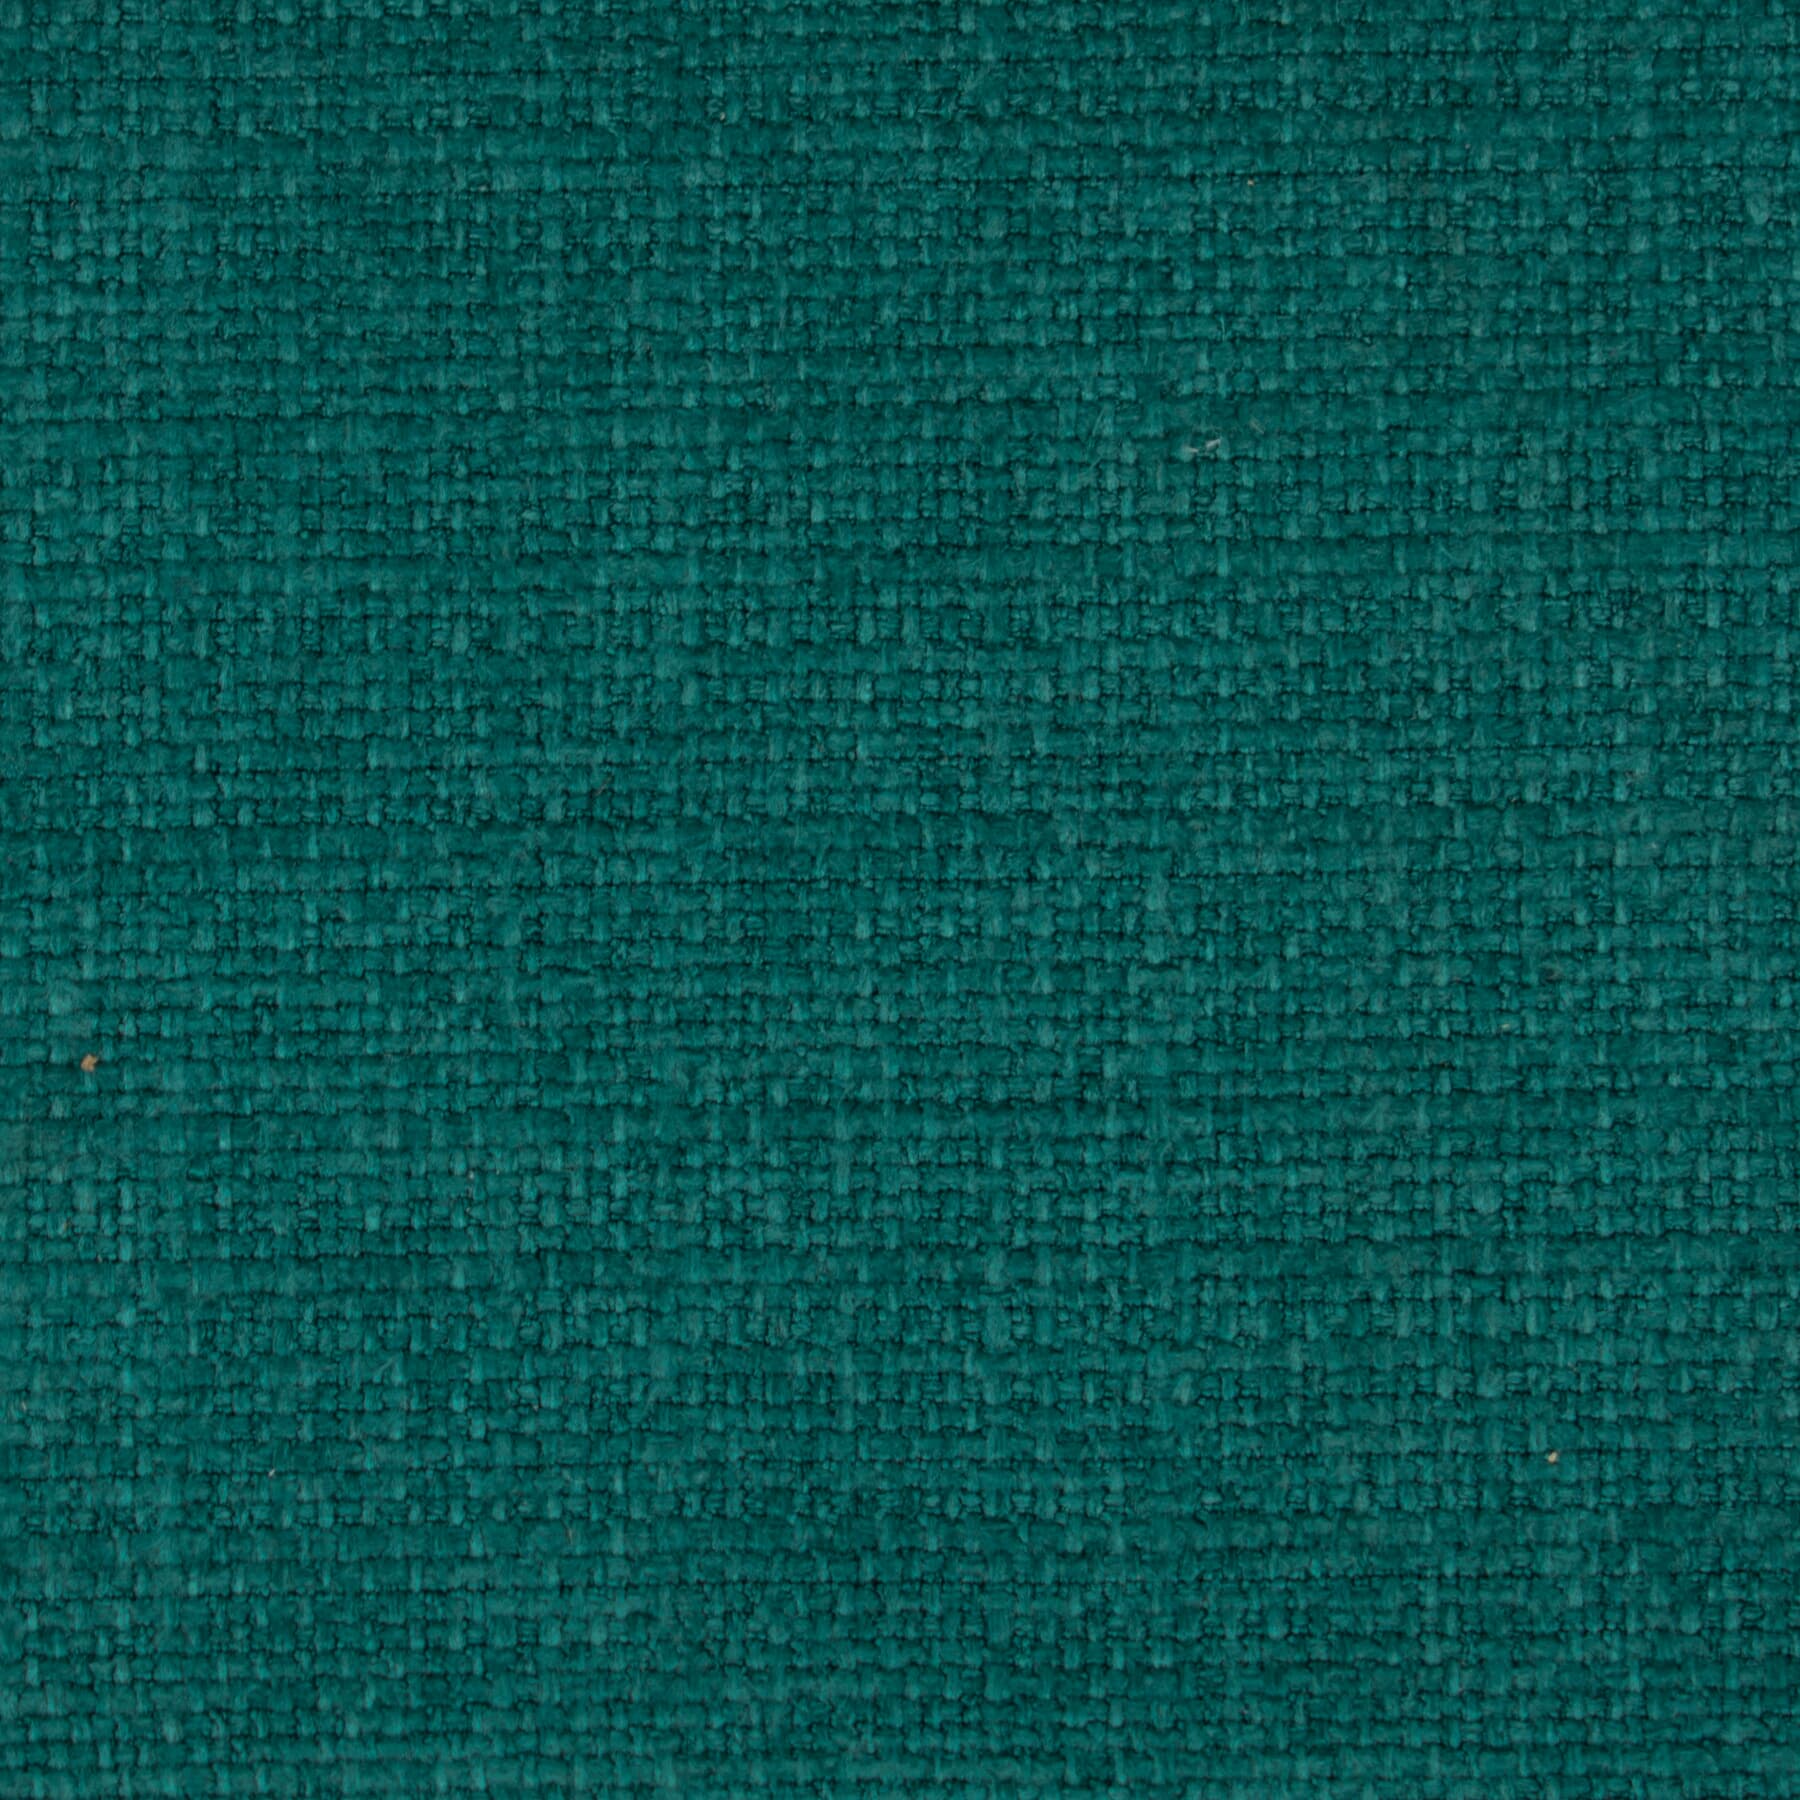 Memento 26 Teal by Stout Fabric